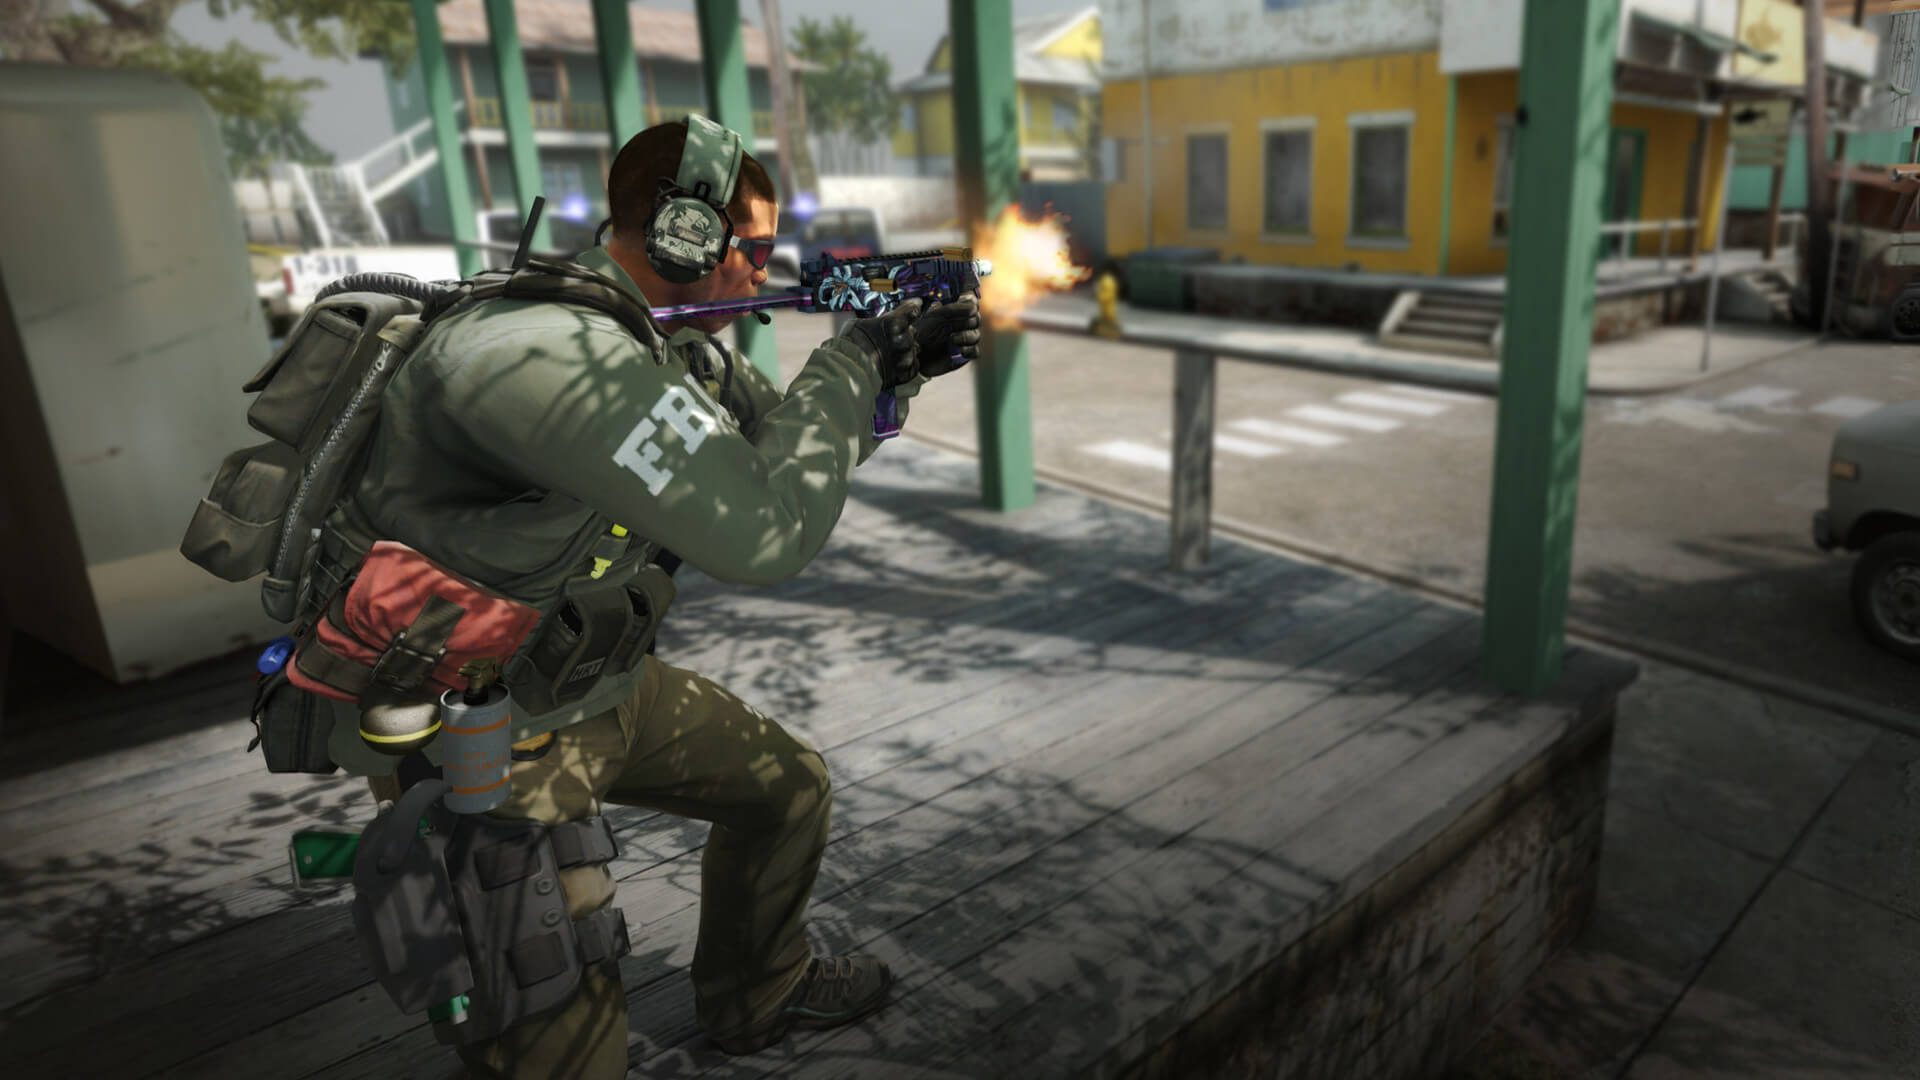 A screenshot of Counter-Strike: Global Offensive, another popular eSports game.